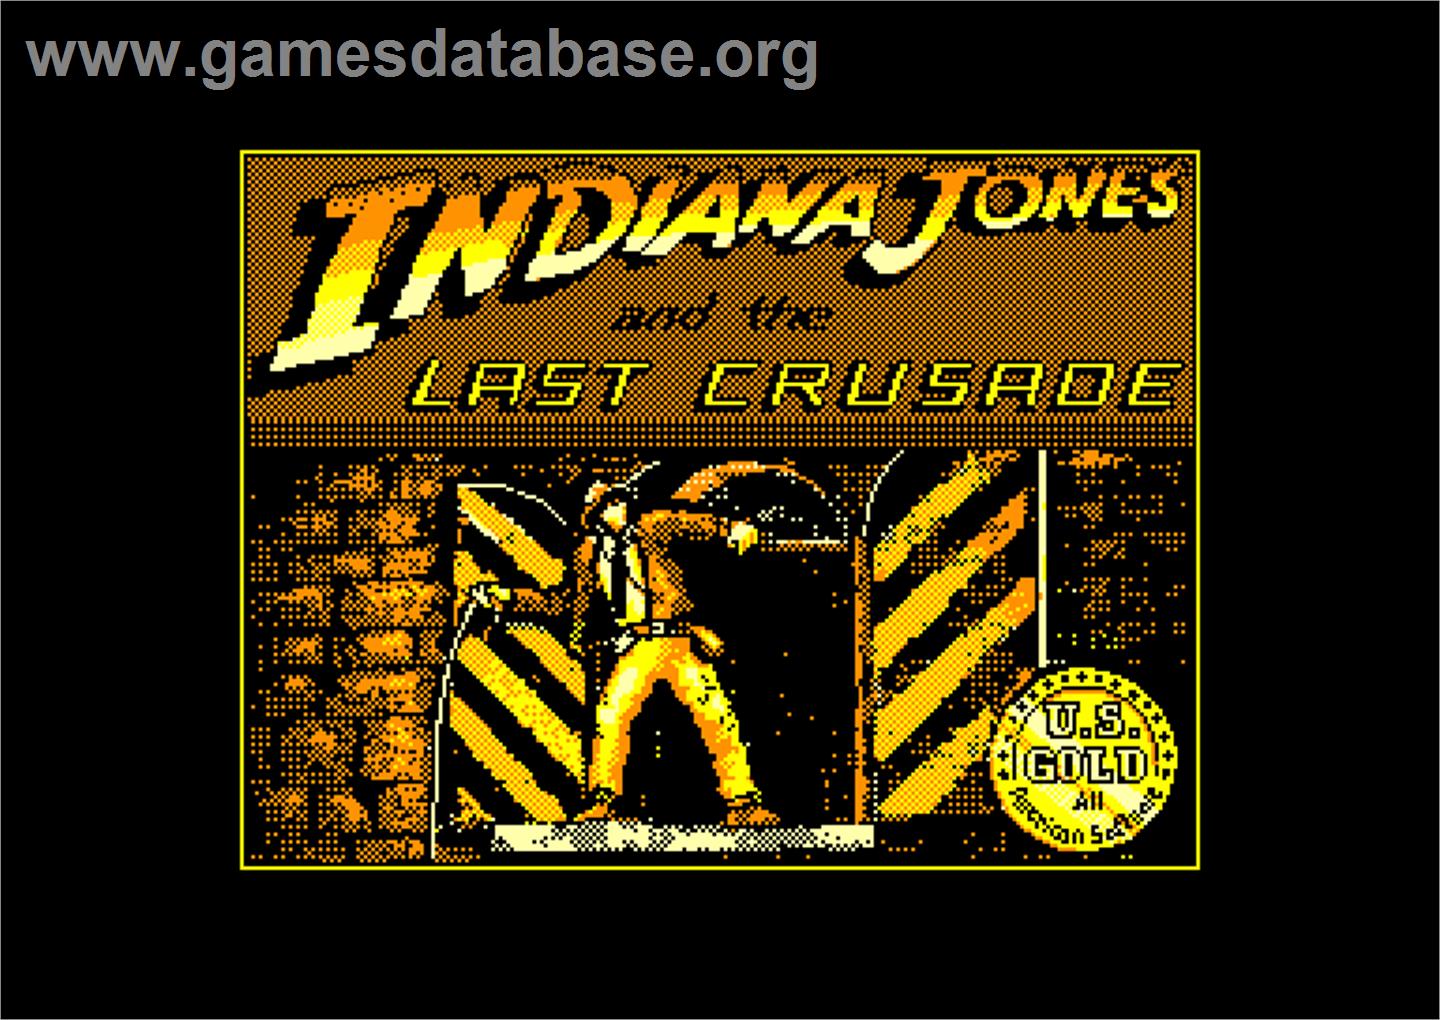 Indiana Jones and the Last Crusade: The Action Game - Amstrad CPC - Artwork - Title Screen